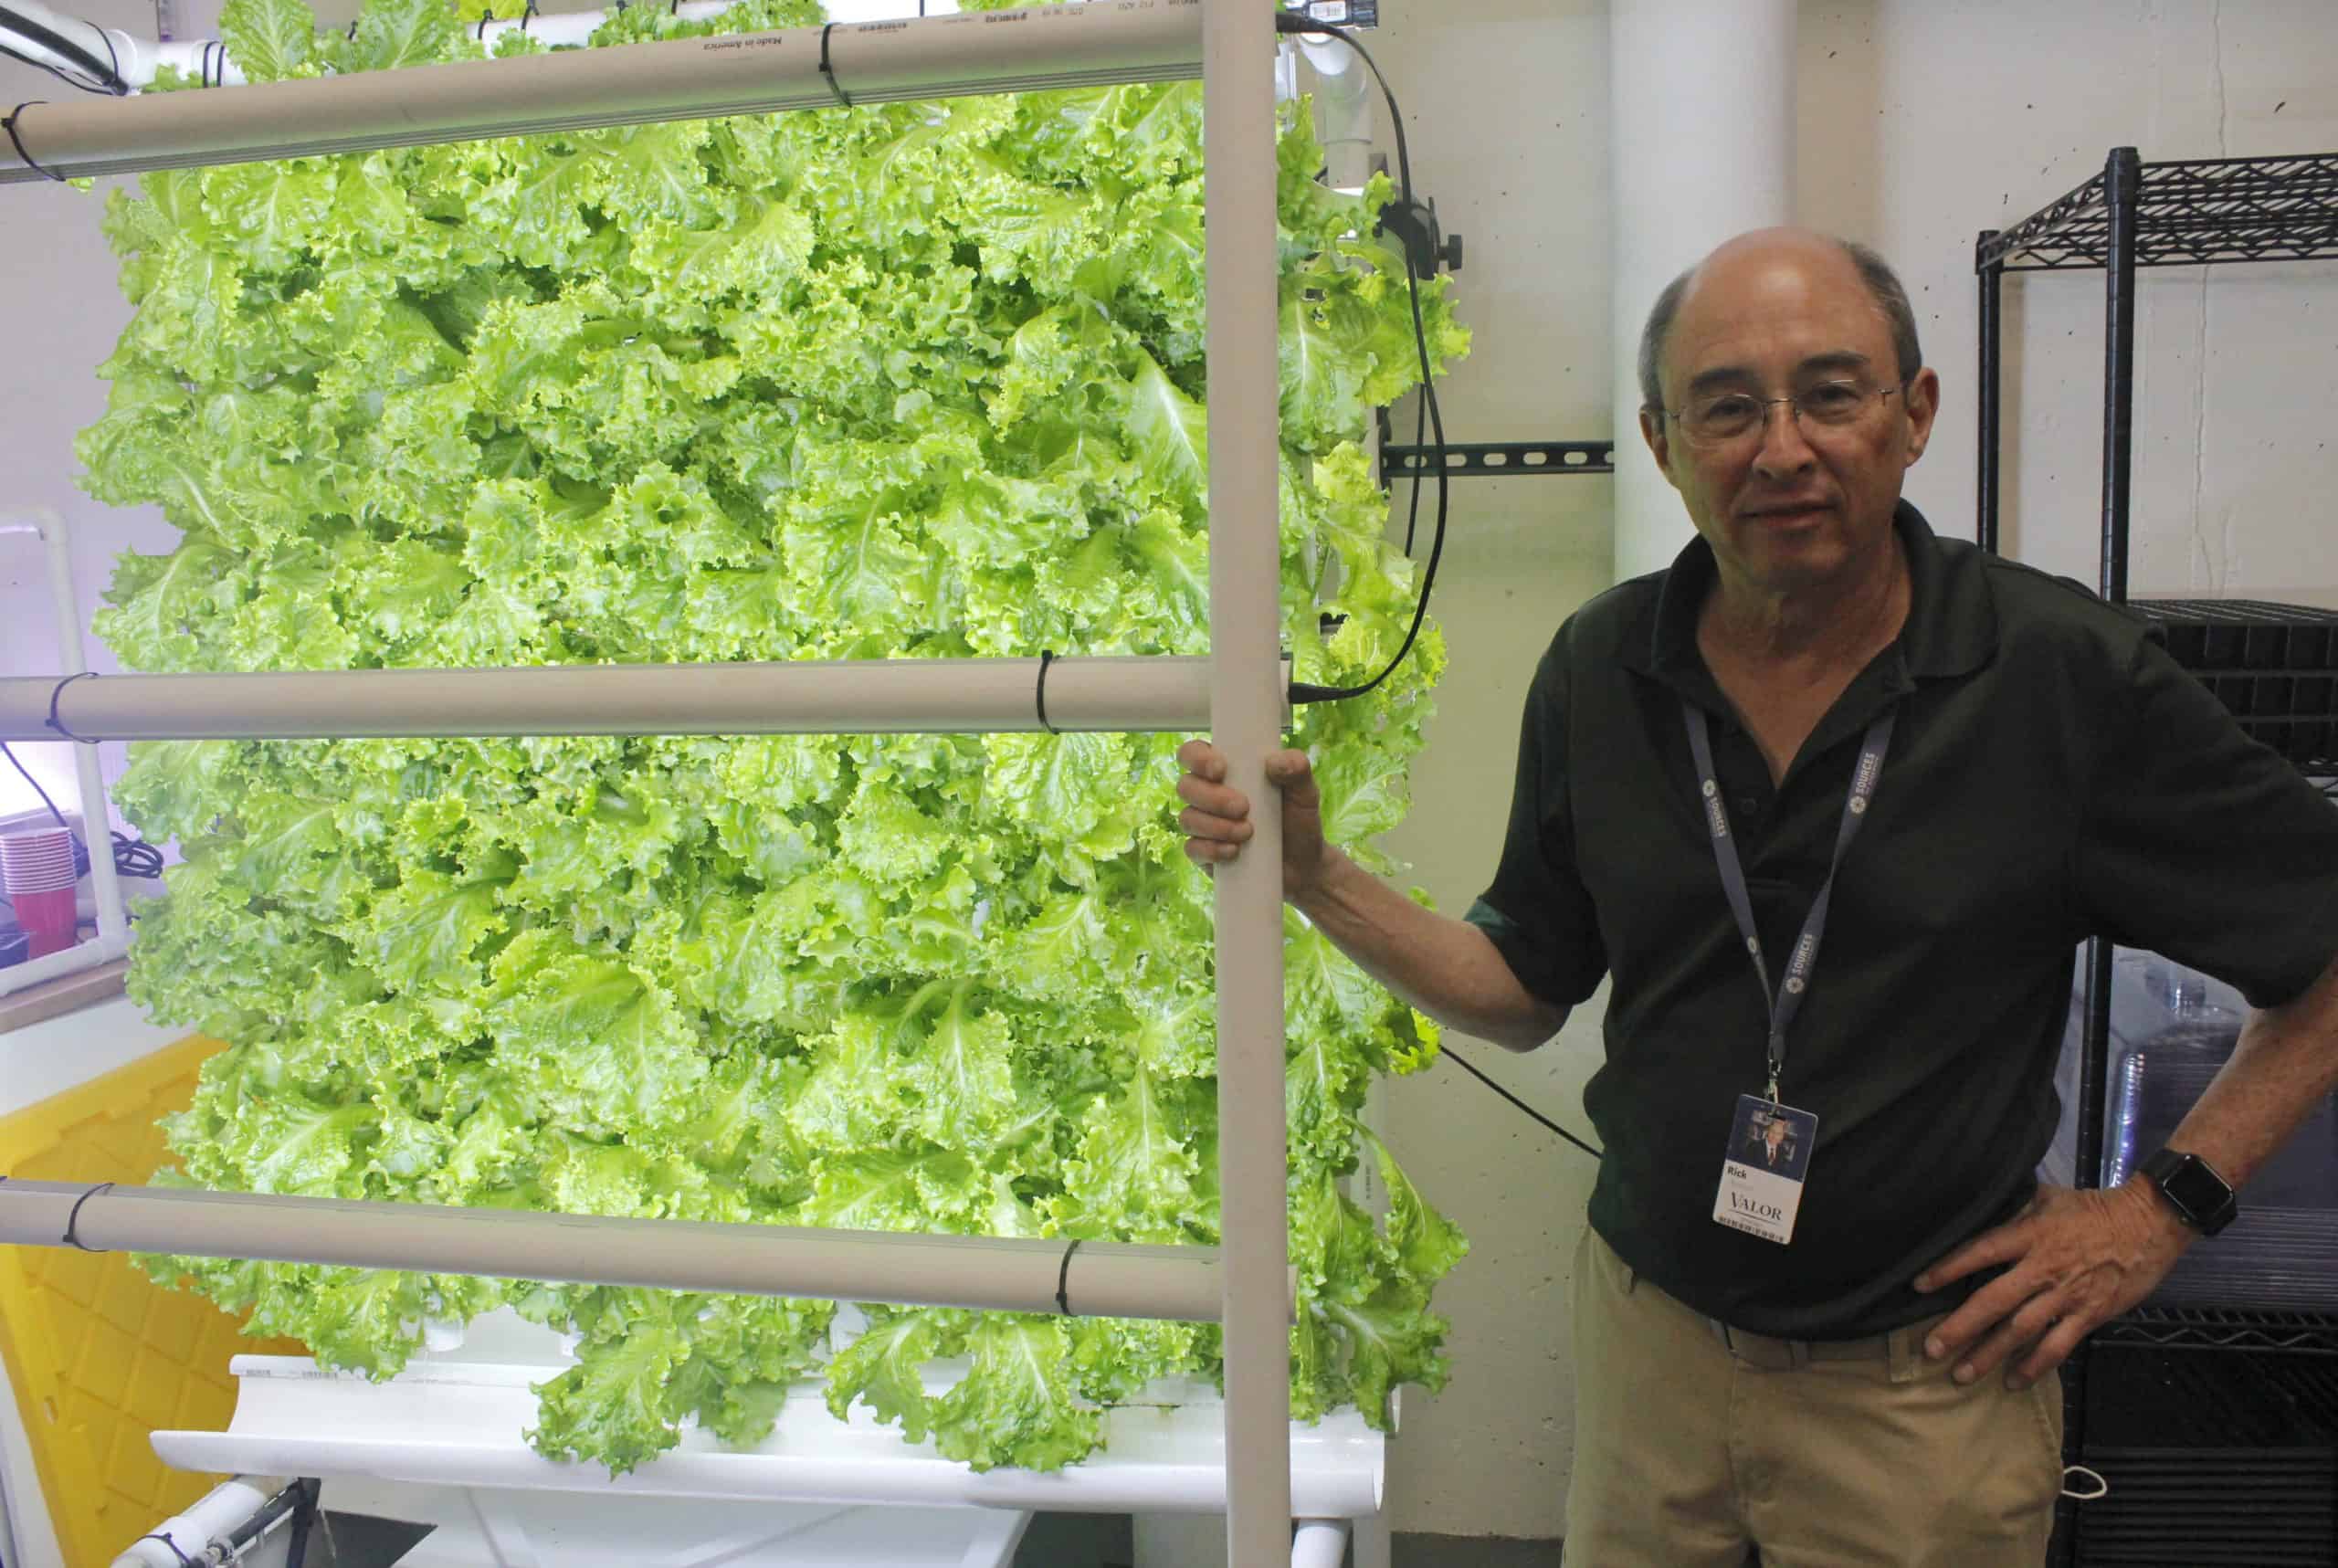 Prototype Vertical Hydroponic System at Valor Christian High School